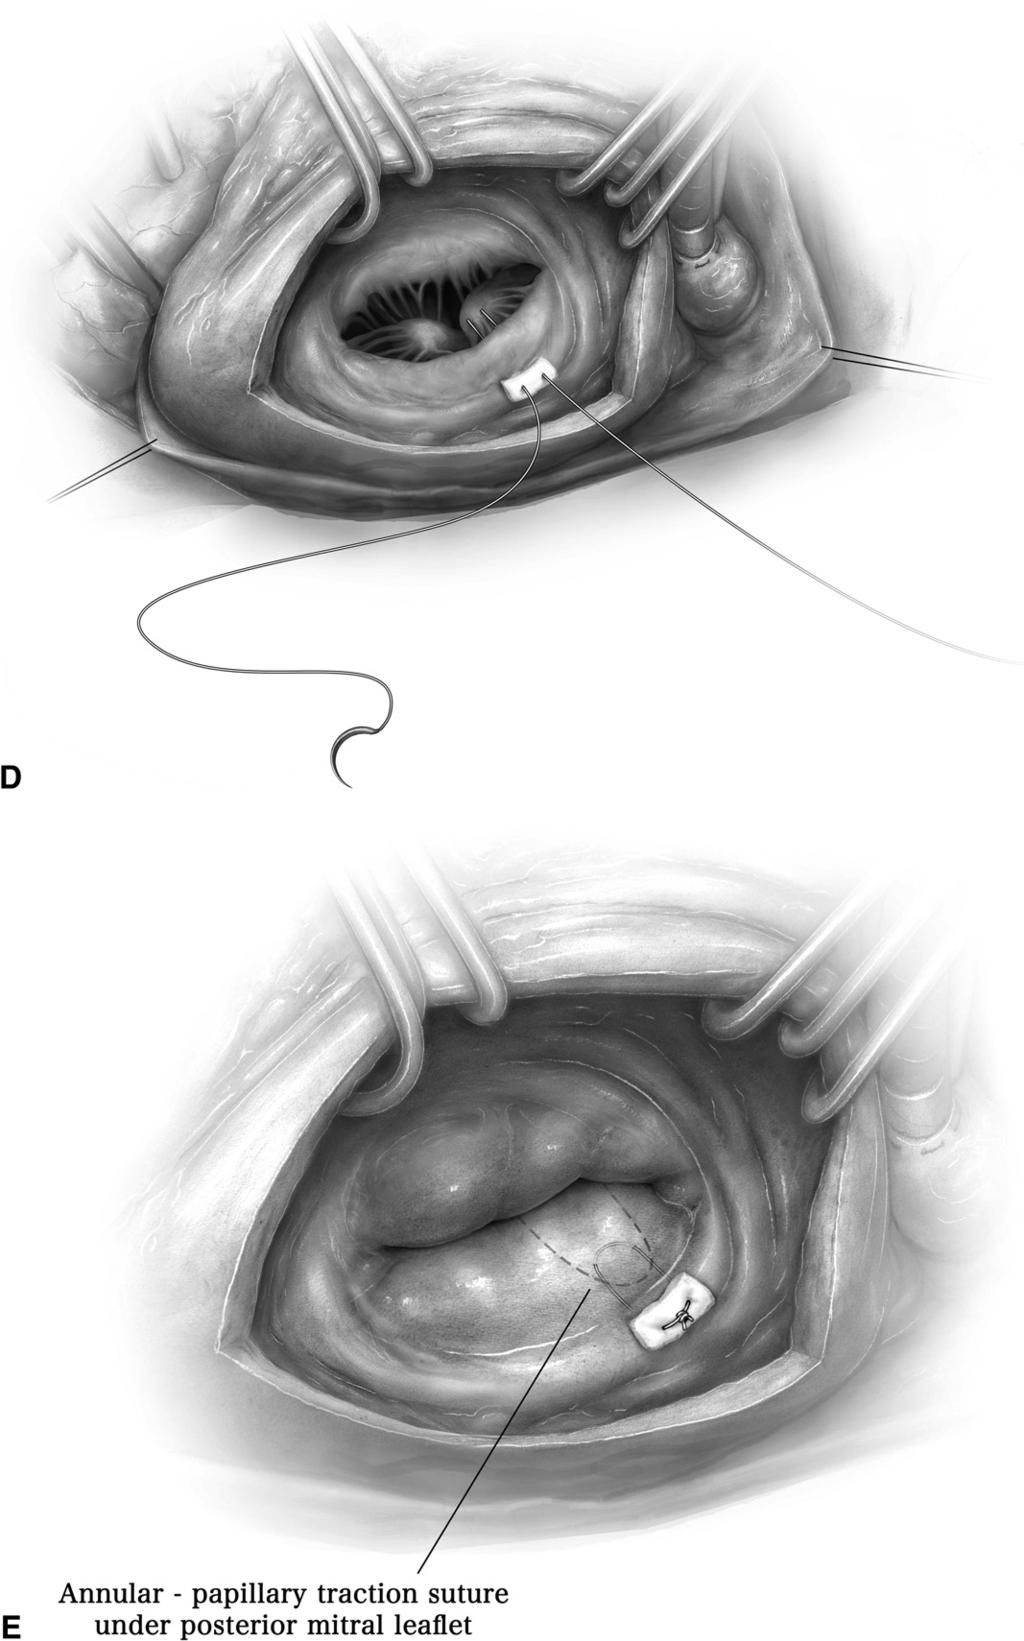 Repair techniques for ischemic mitral regurgitation 211 Figure 7 (continued) (D) The traction suture is passed through the mitral annulus and felt pledget to complete placement of the stitch.